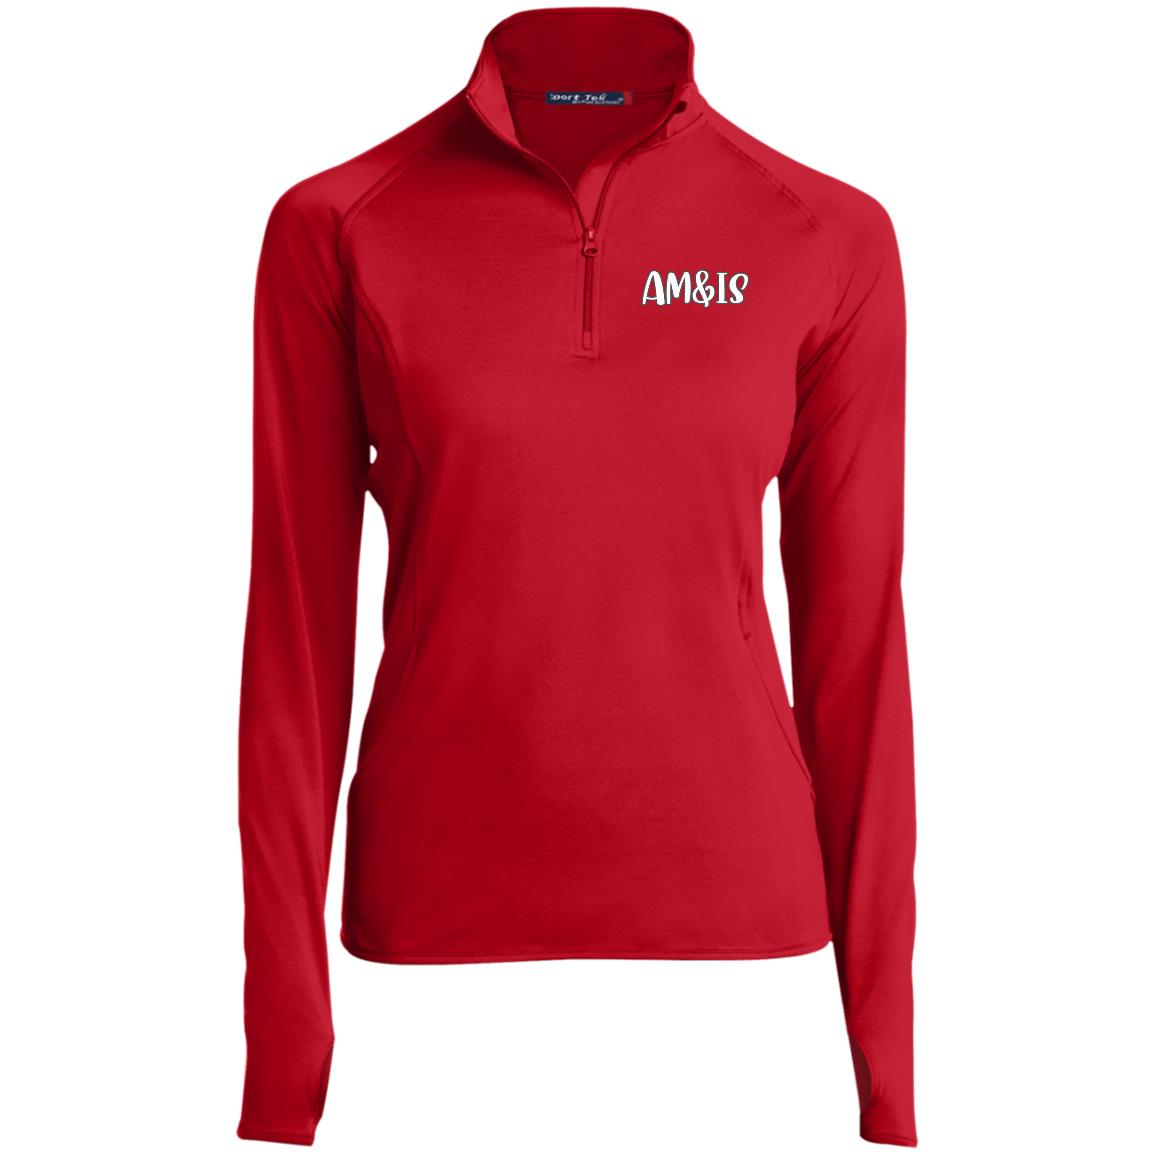 TRUE RED - AM&IS Activewear Ladies' 1/2 Zip Performance Pullover - womens shirt at TFC&H Co.